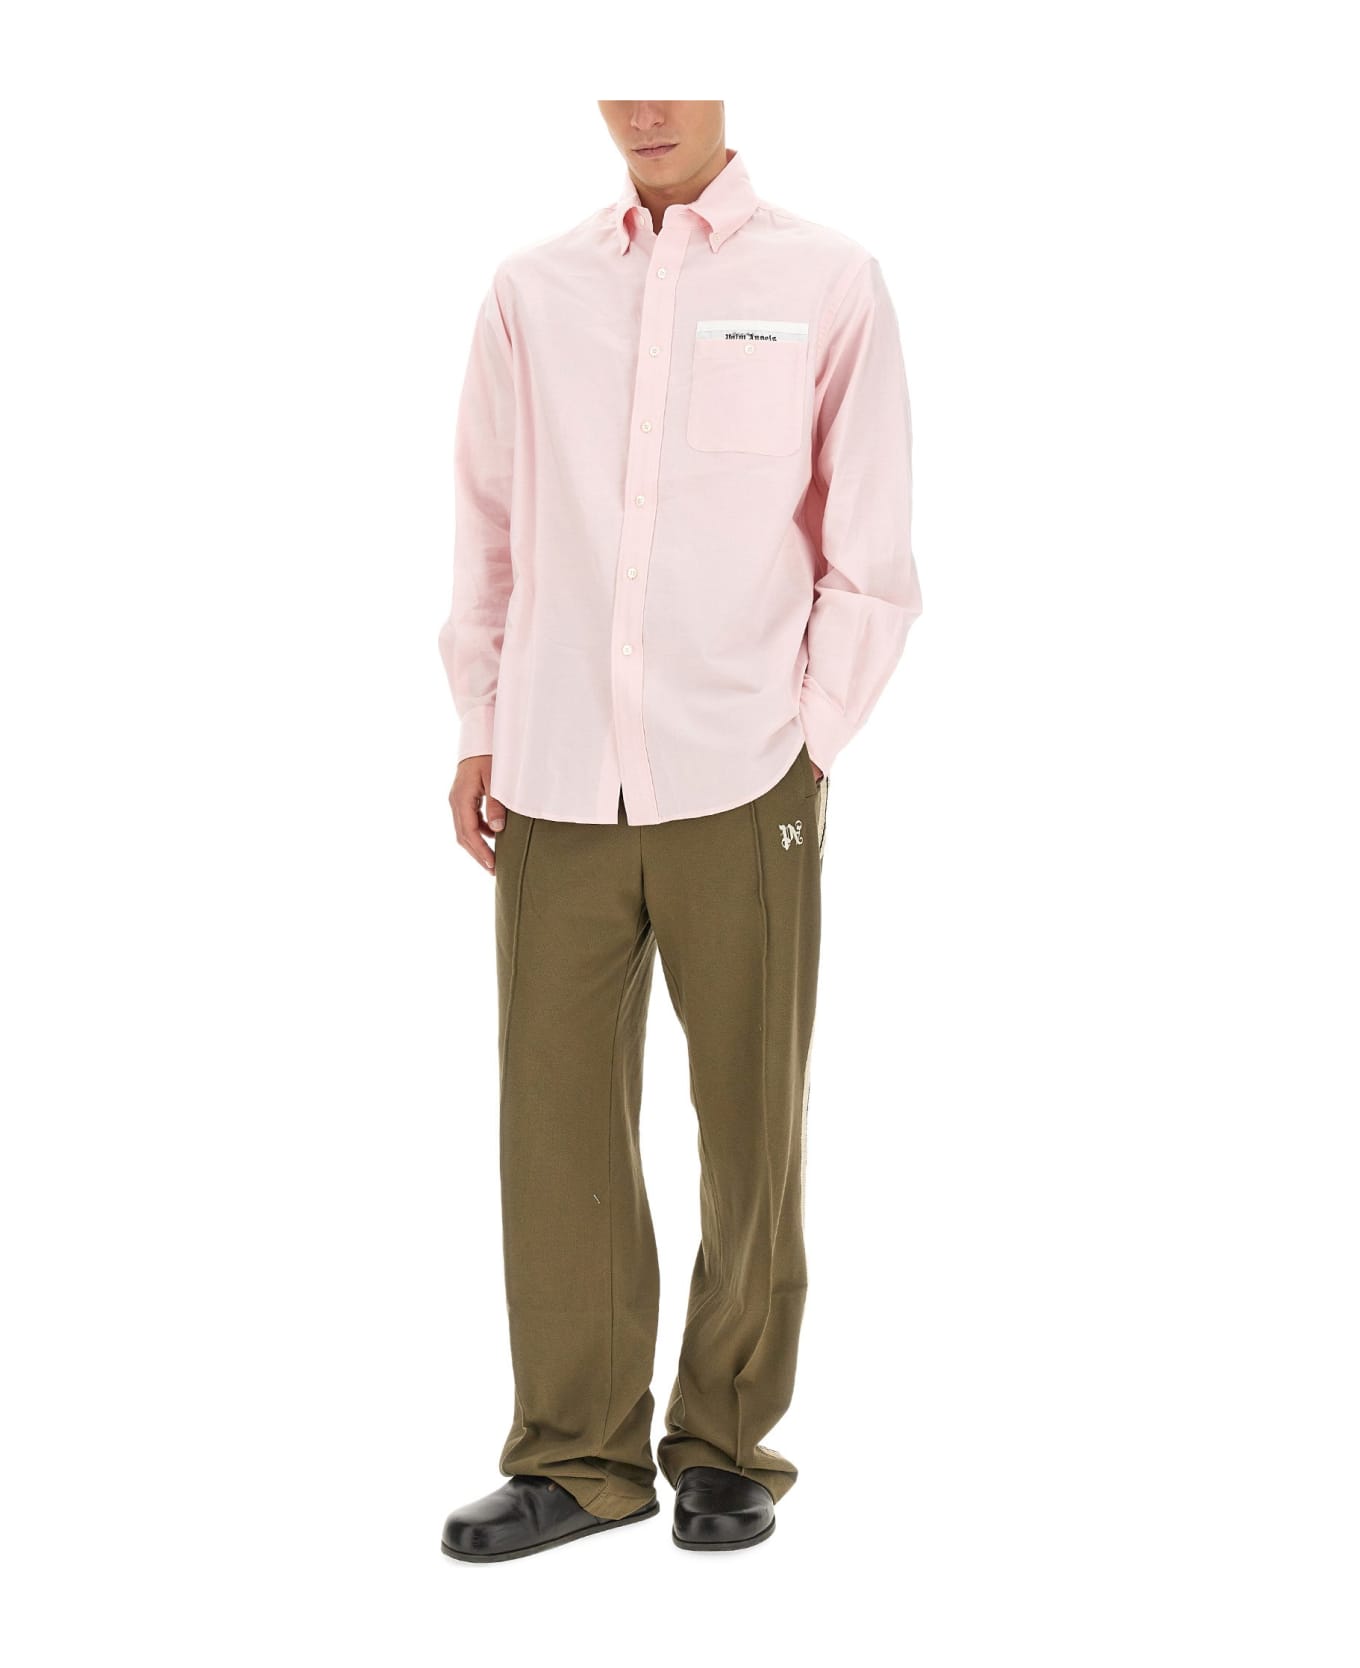 Palm Angels Tailor-made Shirt - PINK/BLACK シャツ